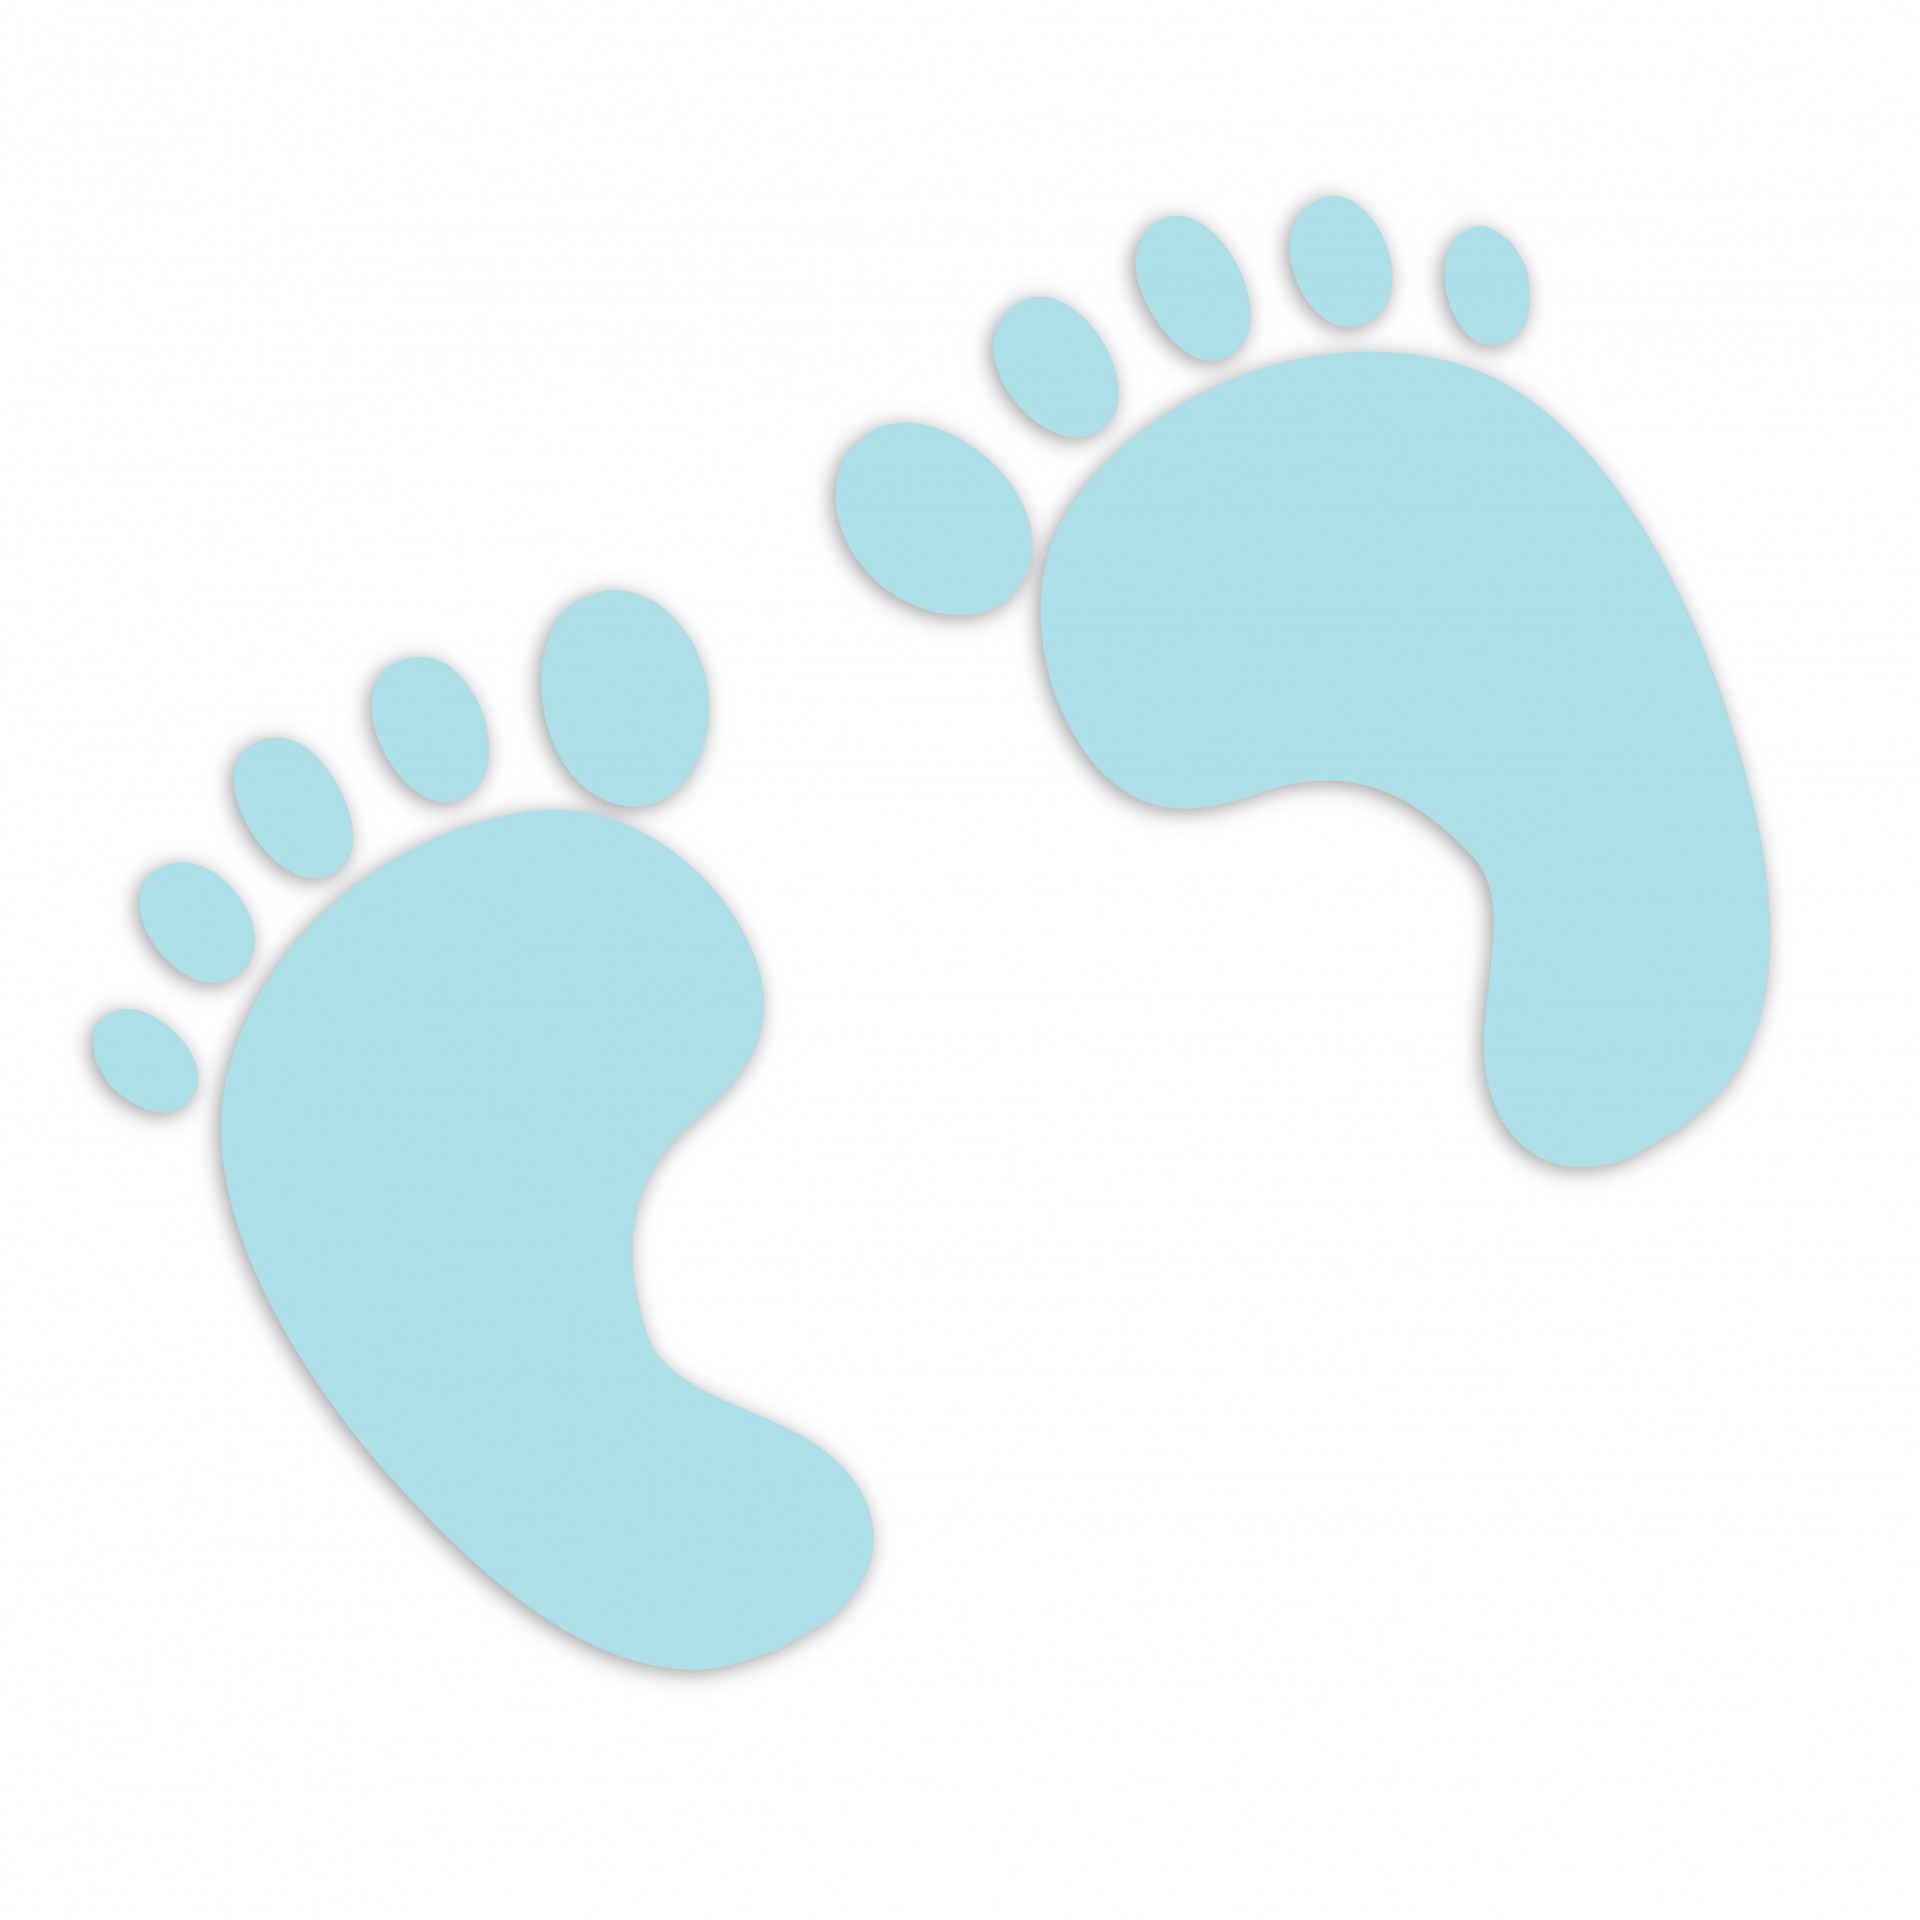 free clipart of baby boy - photo #47